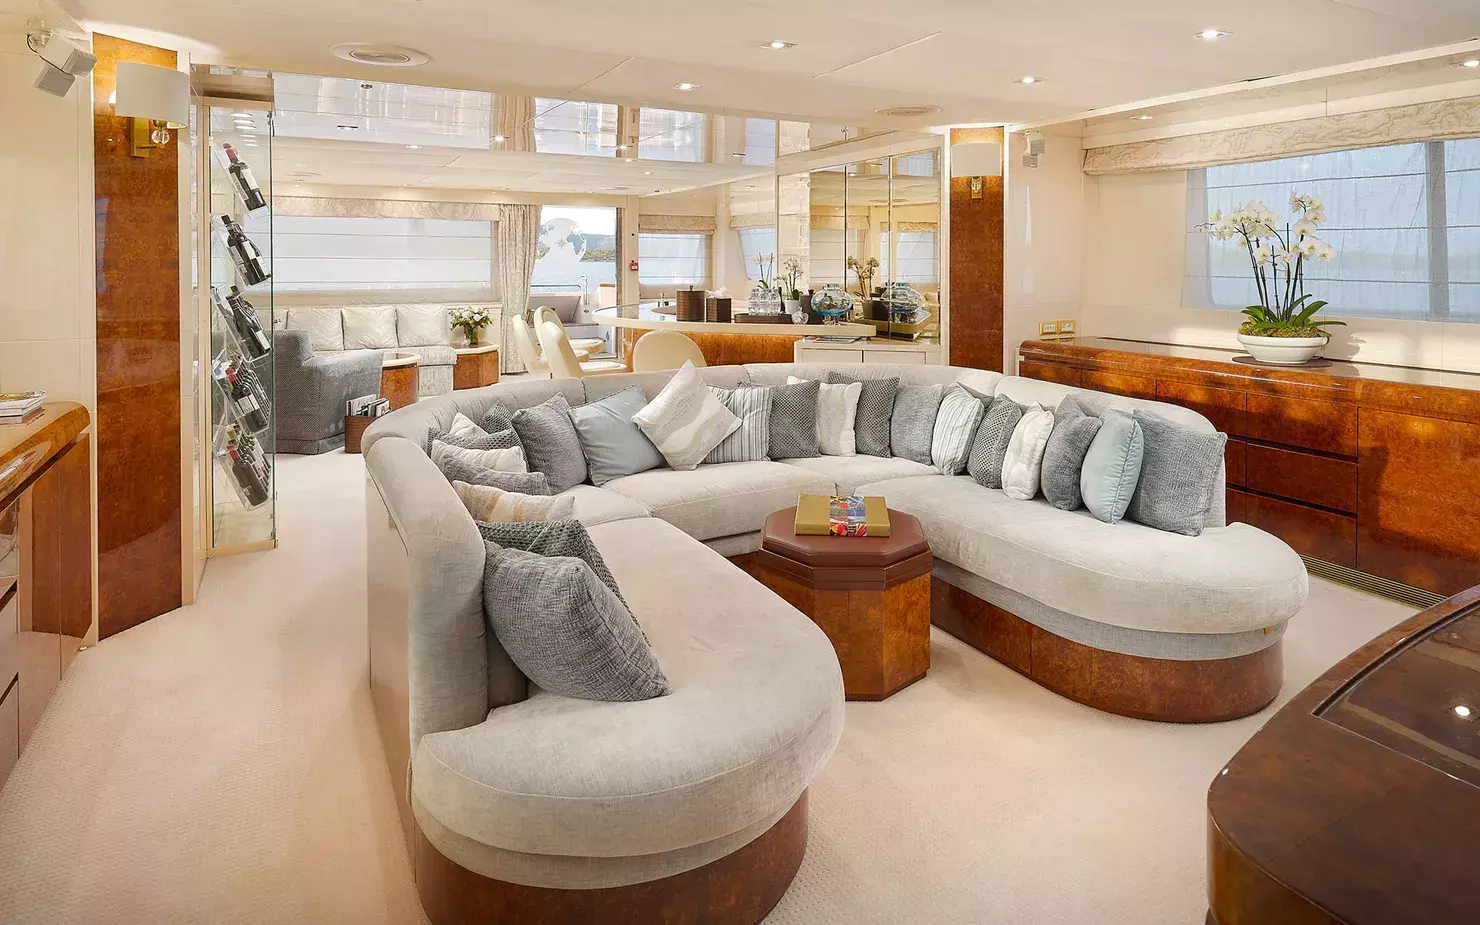 Ladyship by Heesen - Top rates for a Charter of a private Superyacht in Croatia